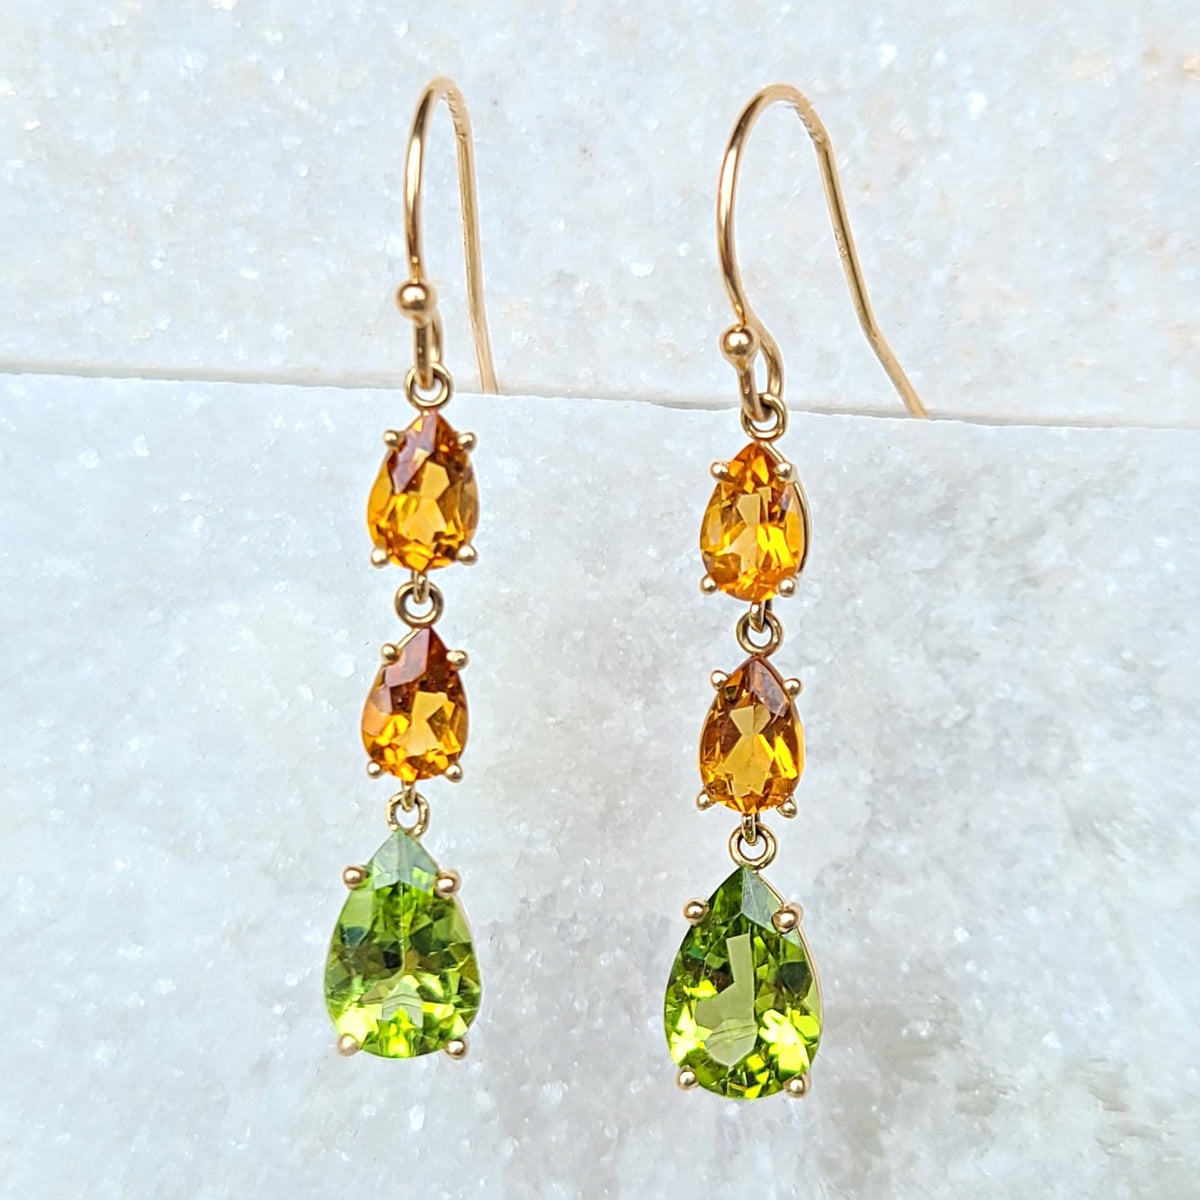 Sincerely Ginger Jewelry 14K Peridot and Citrine Drop Earrings in Yellow Gold